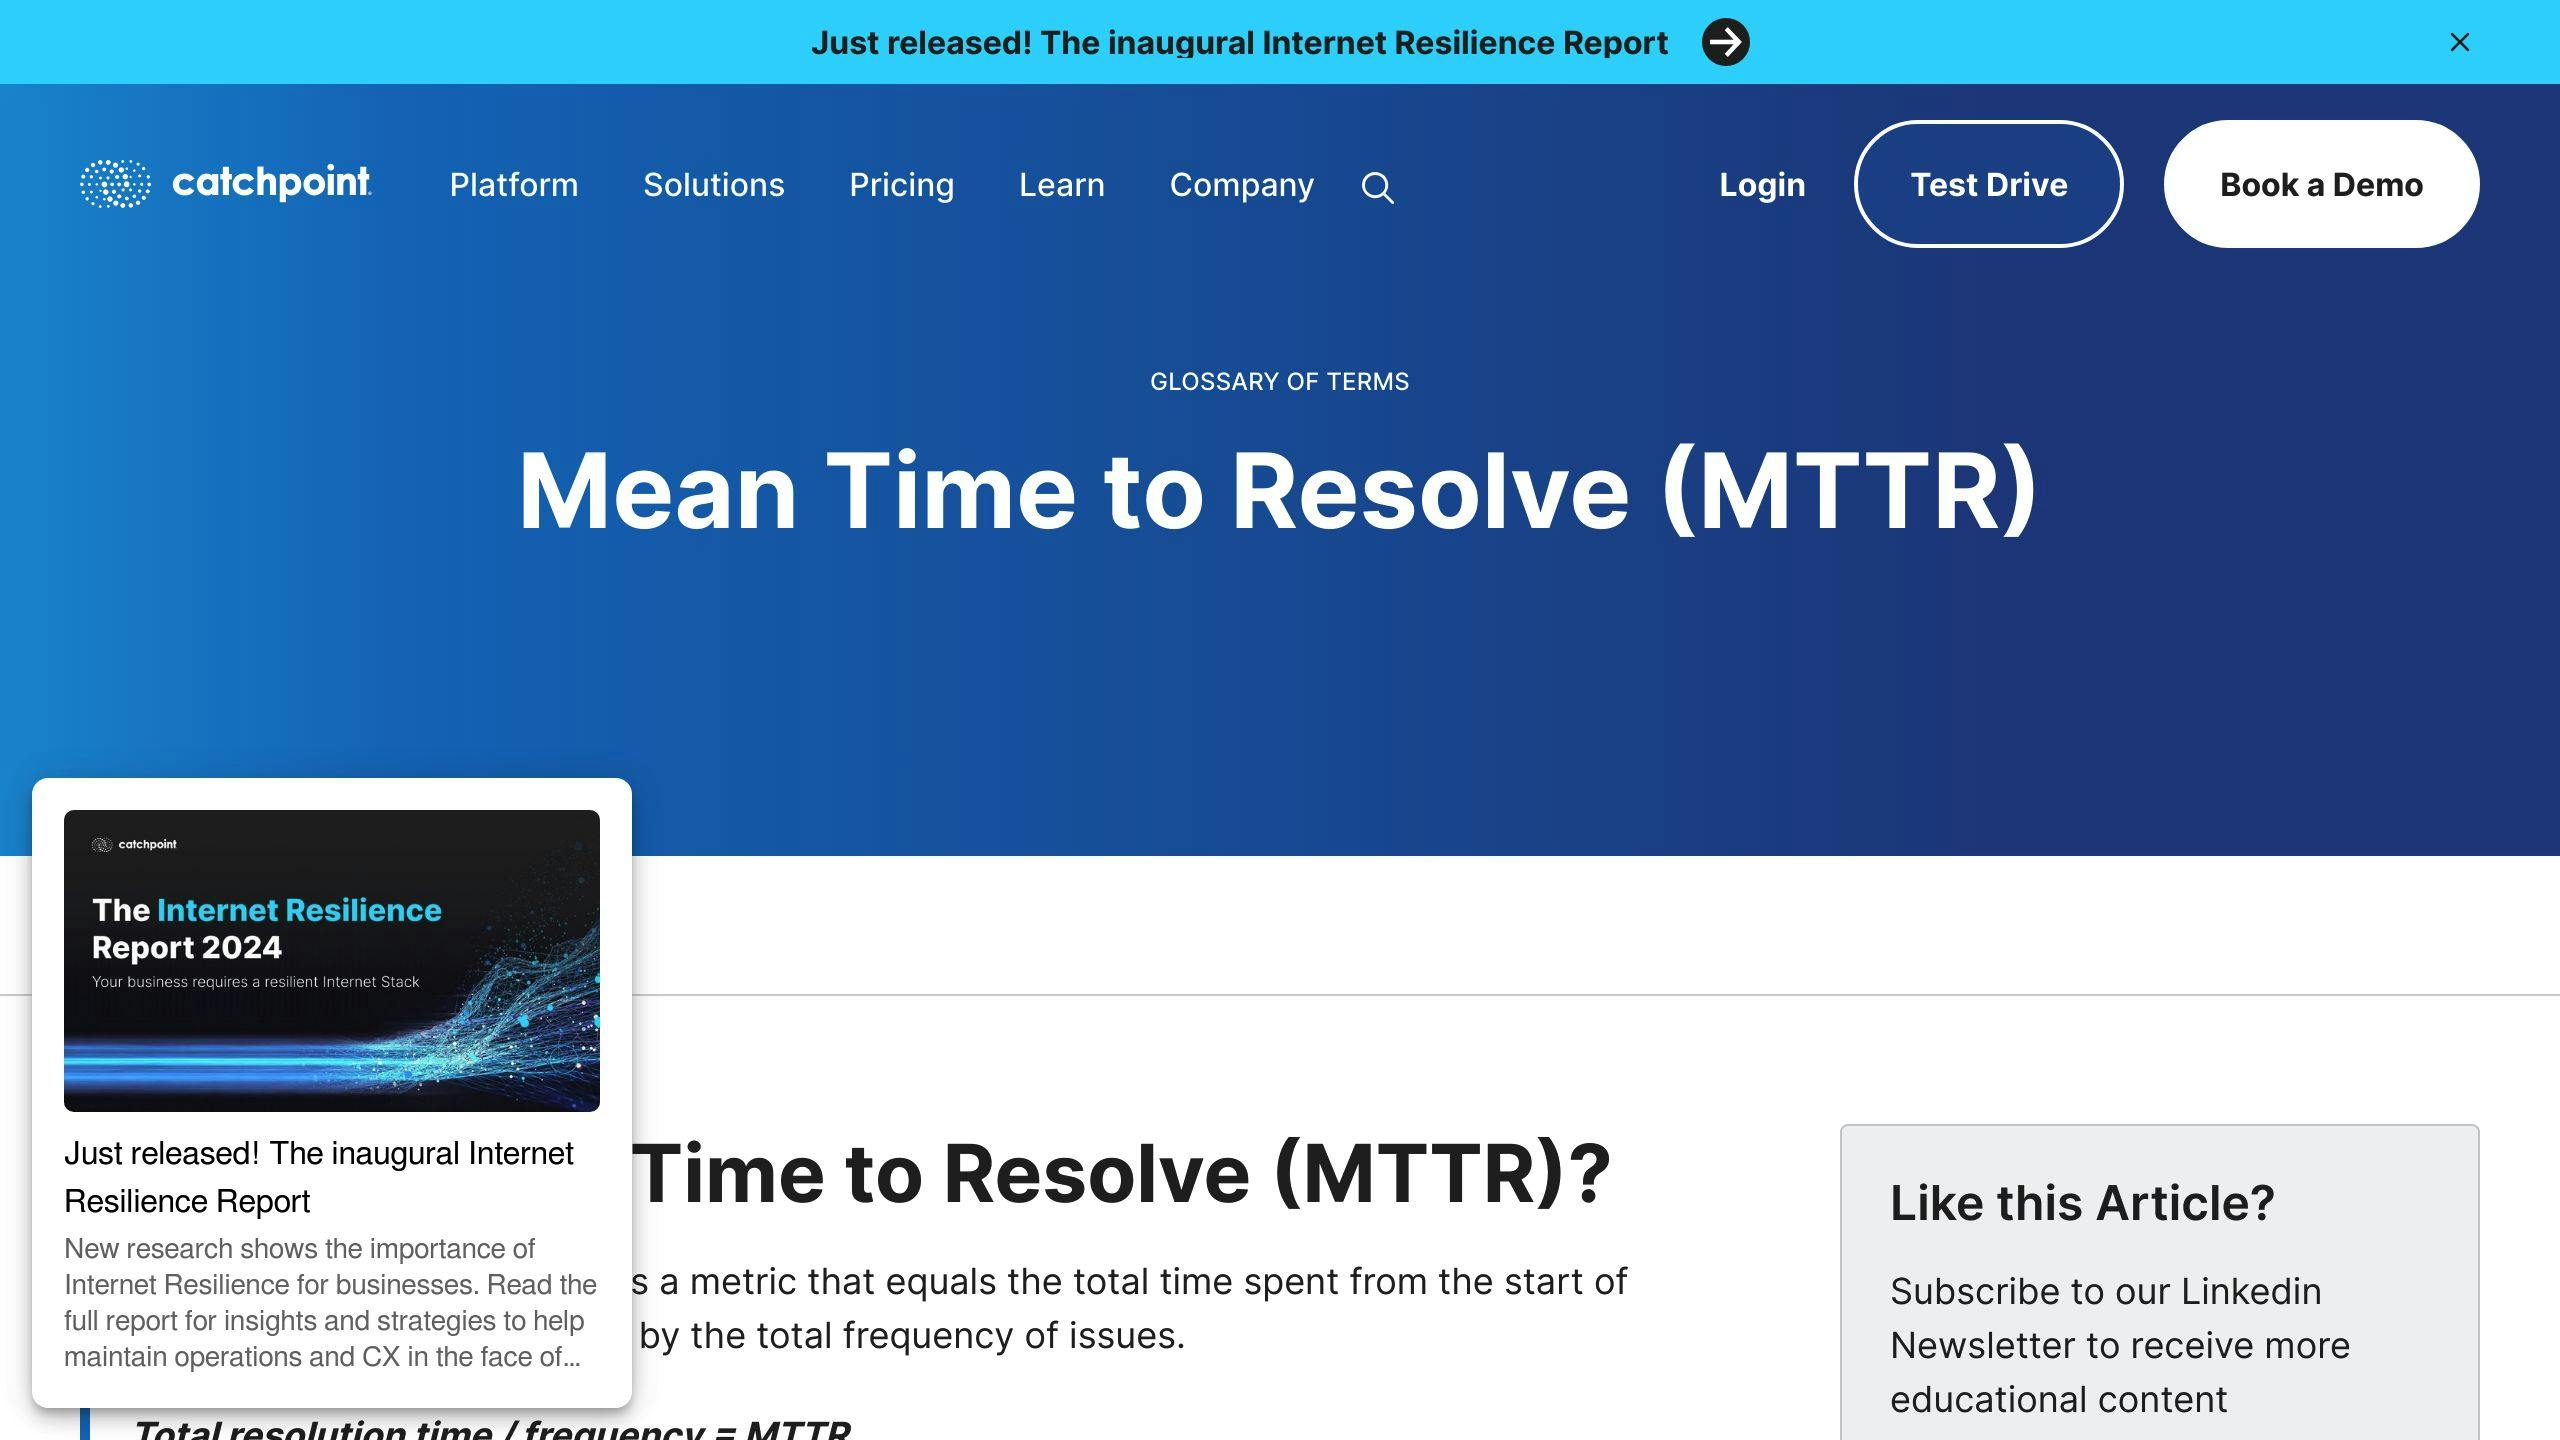 Mean Time to Resolve